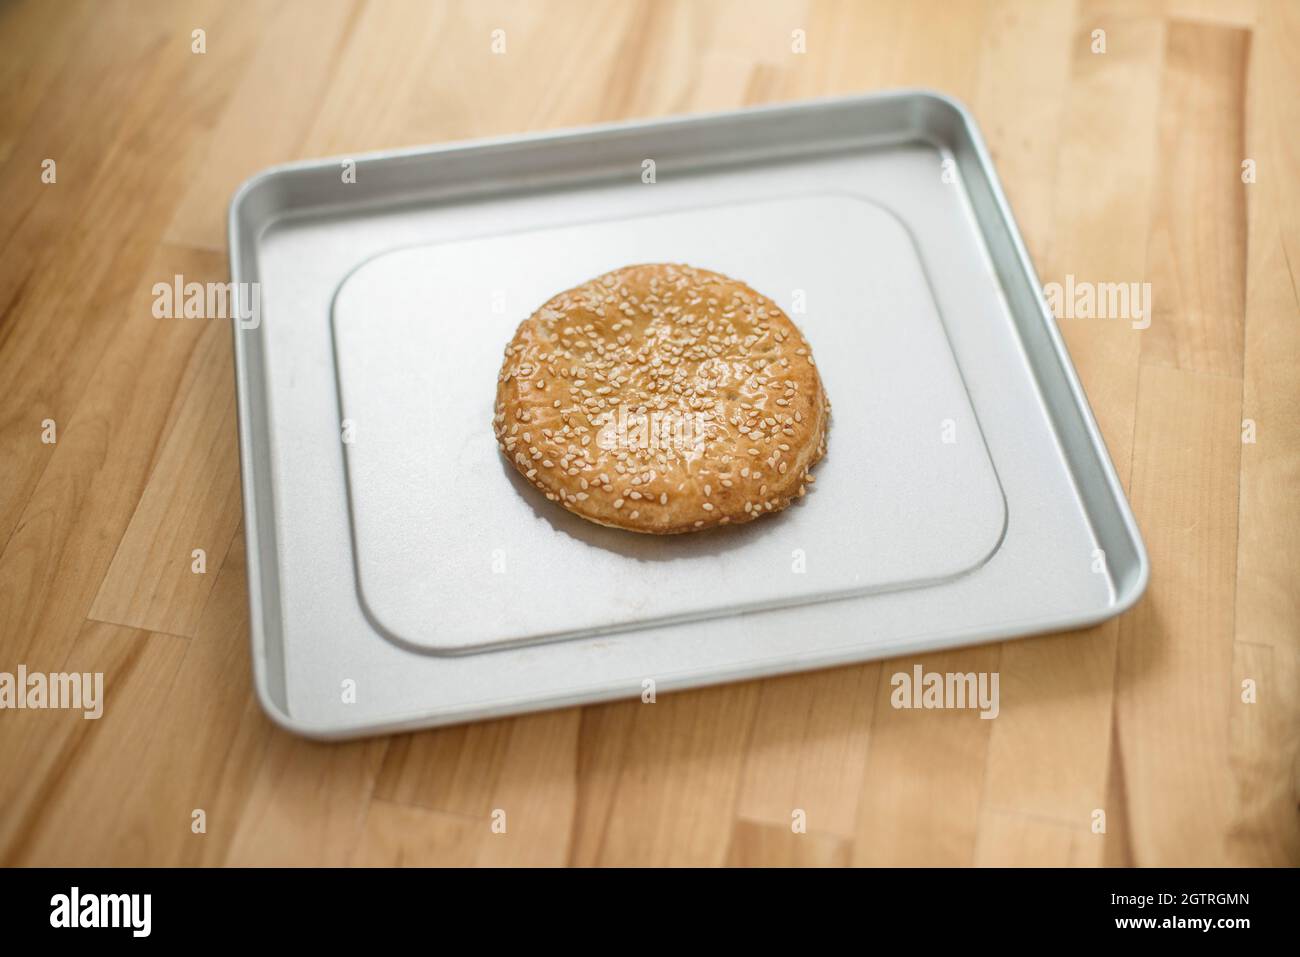 High Angle View Of Biscuit On Table Stock Photo